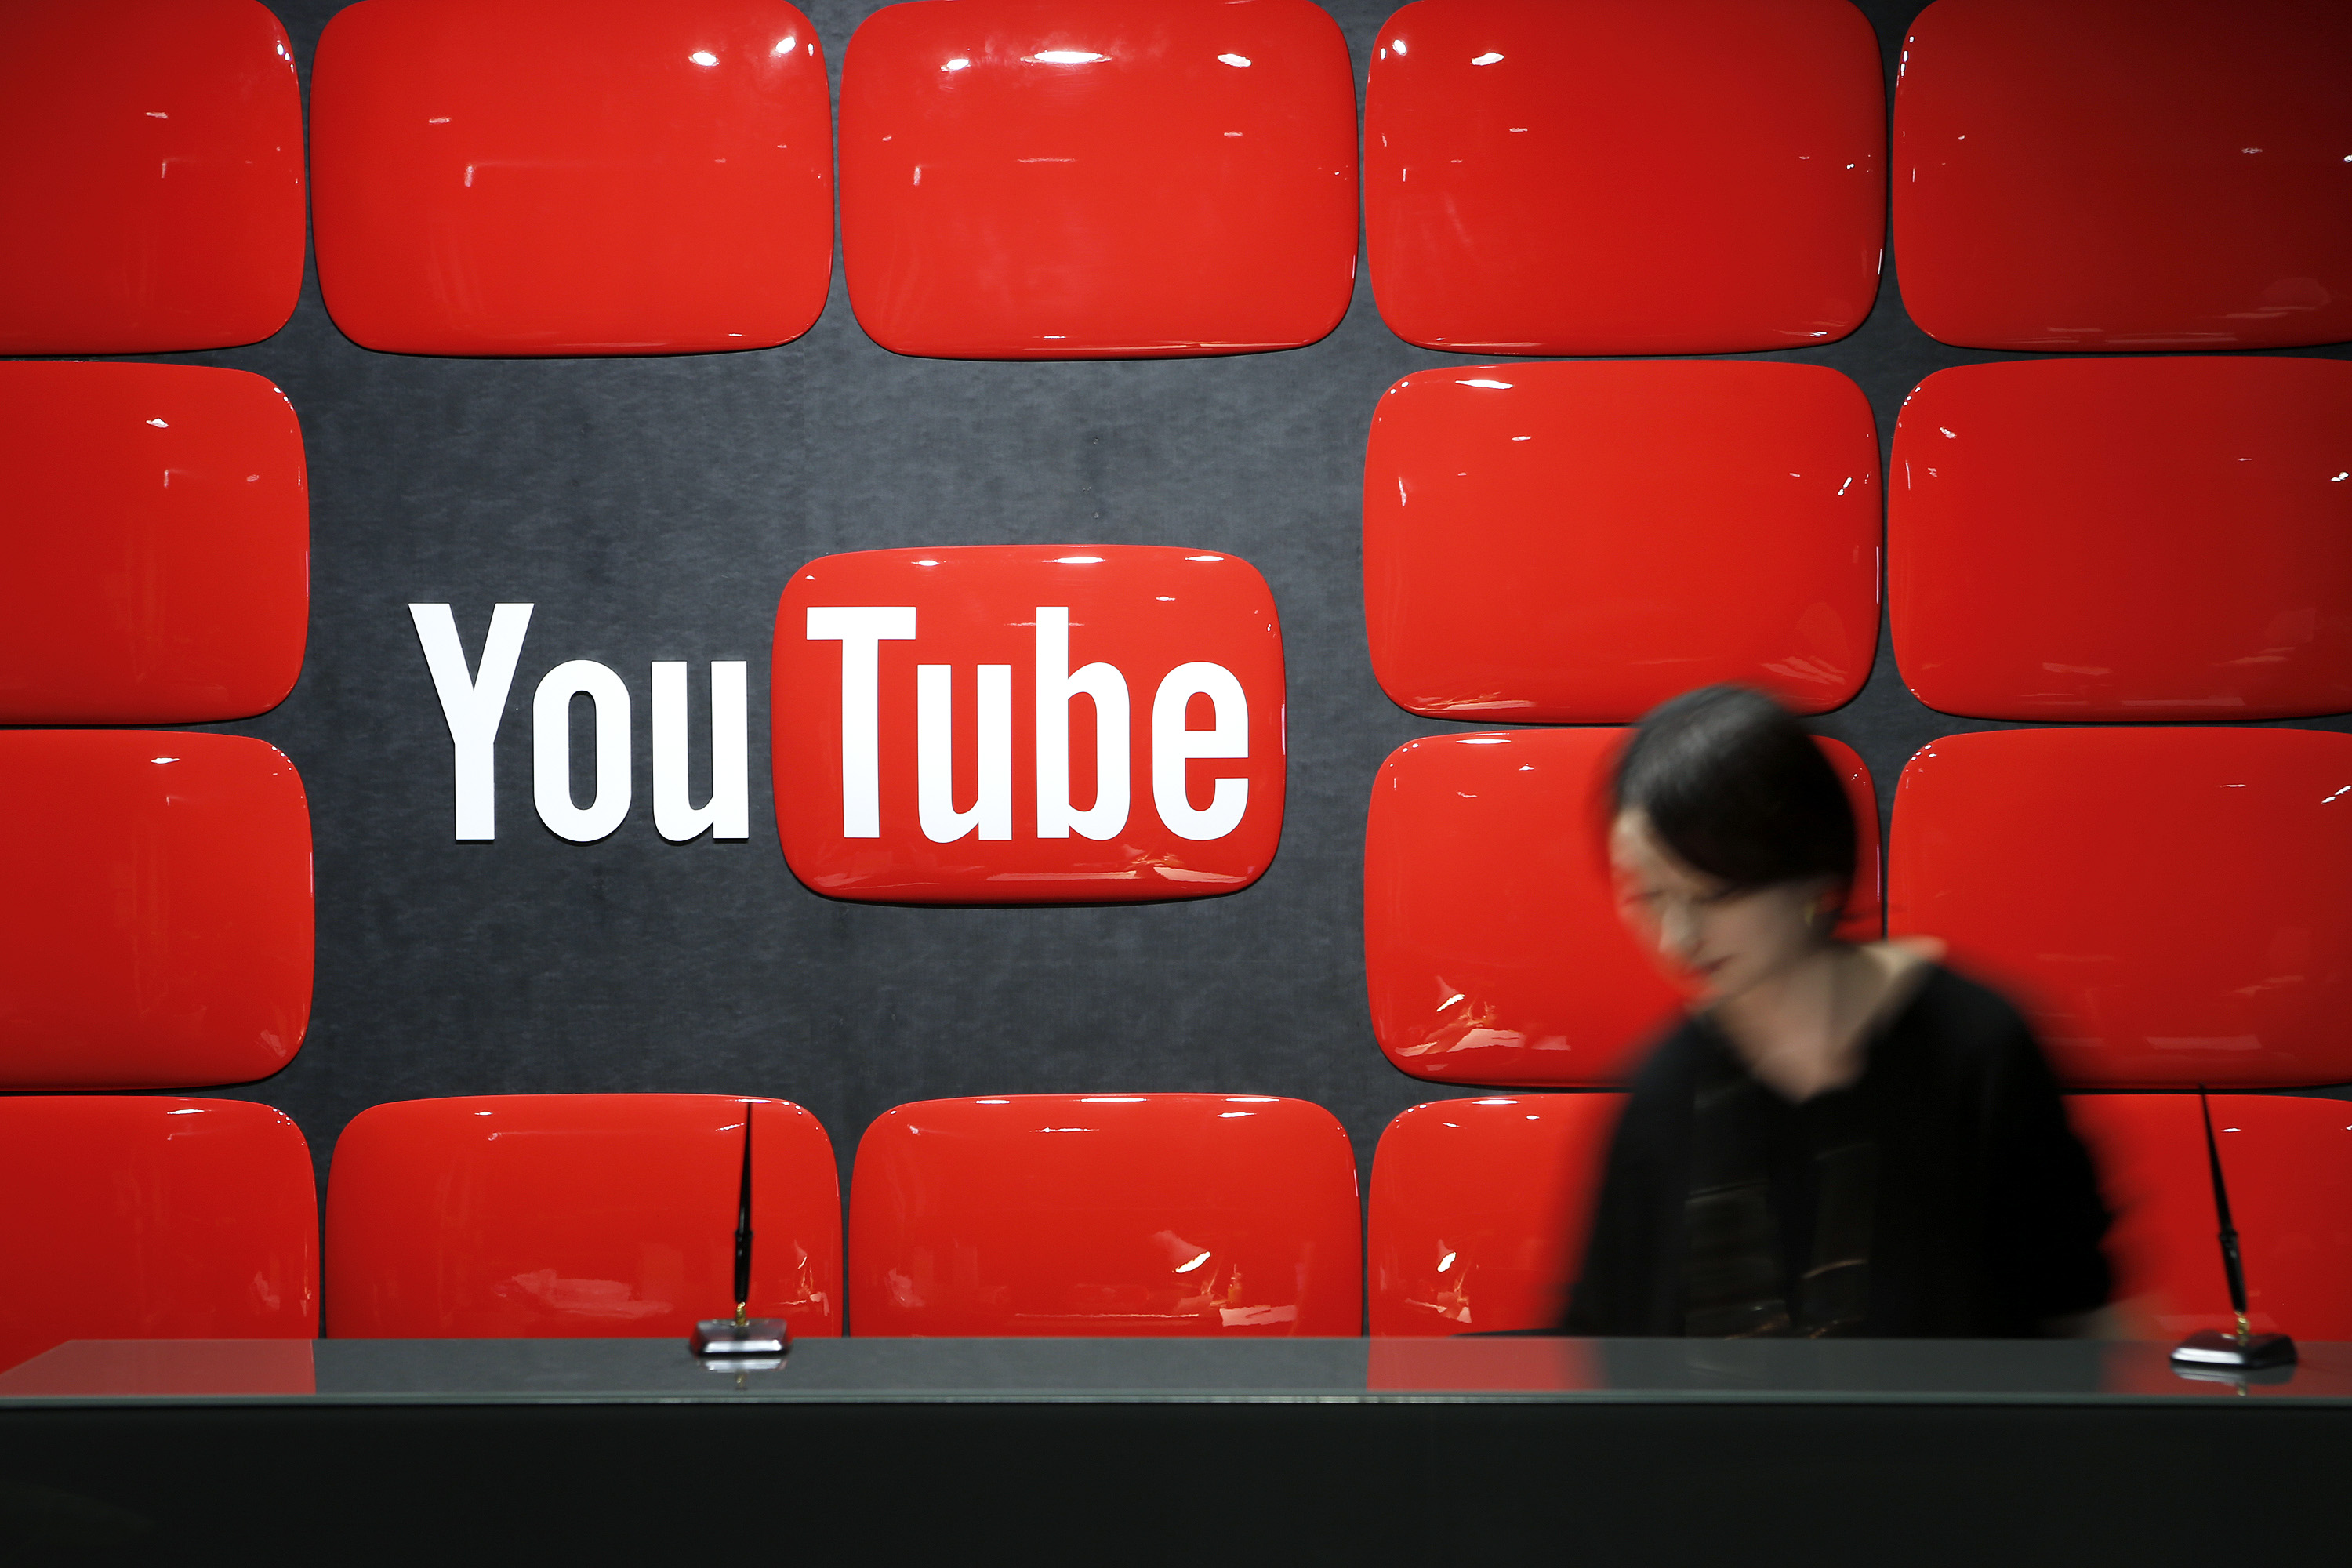 Google Inc.'s YouTube logo is displayed behind the reception desk at the company's YouTube Space studio in Tokyo, Japan, on Saturday, March 30, 2013. (Bloomberg&mdash;Bloomberg via Getty Images)